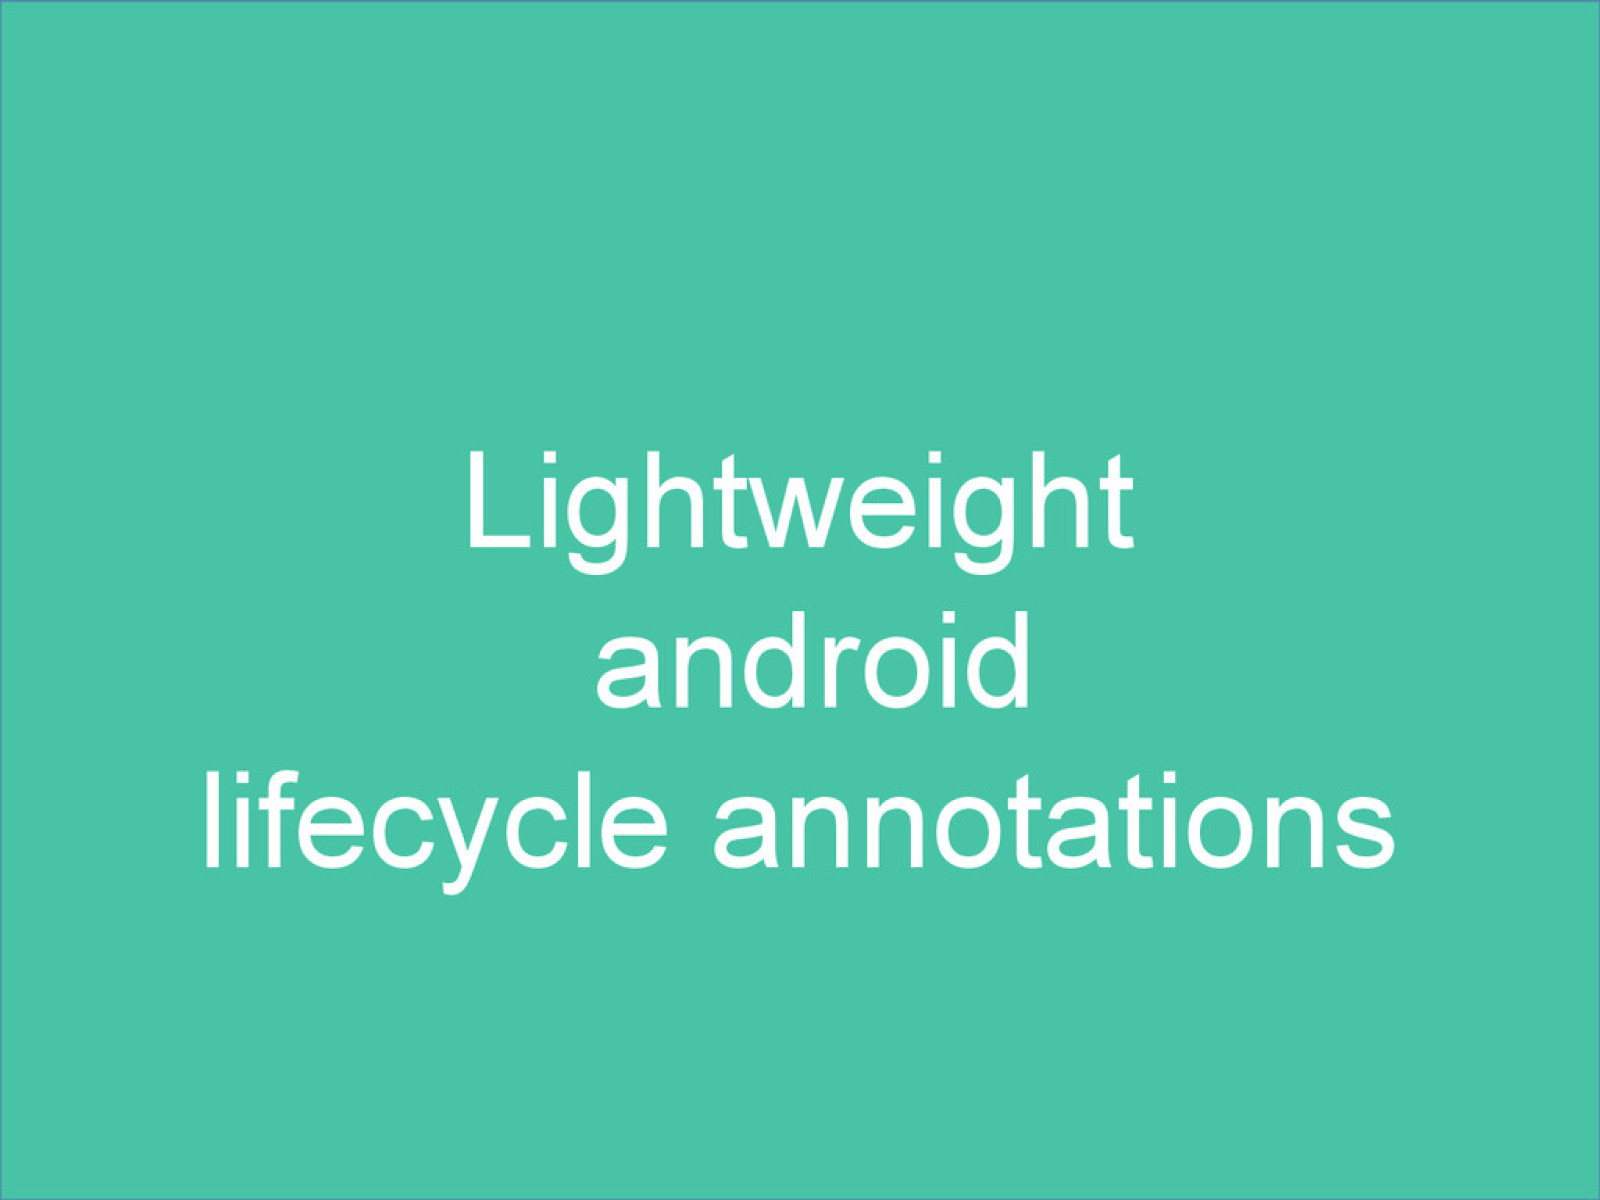 Lightweight Android lifecycle annotations